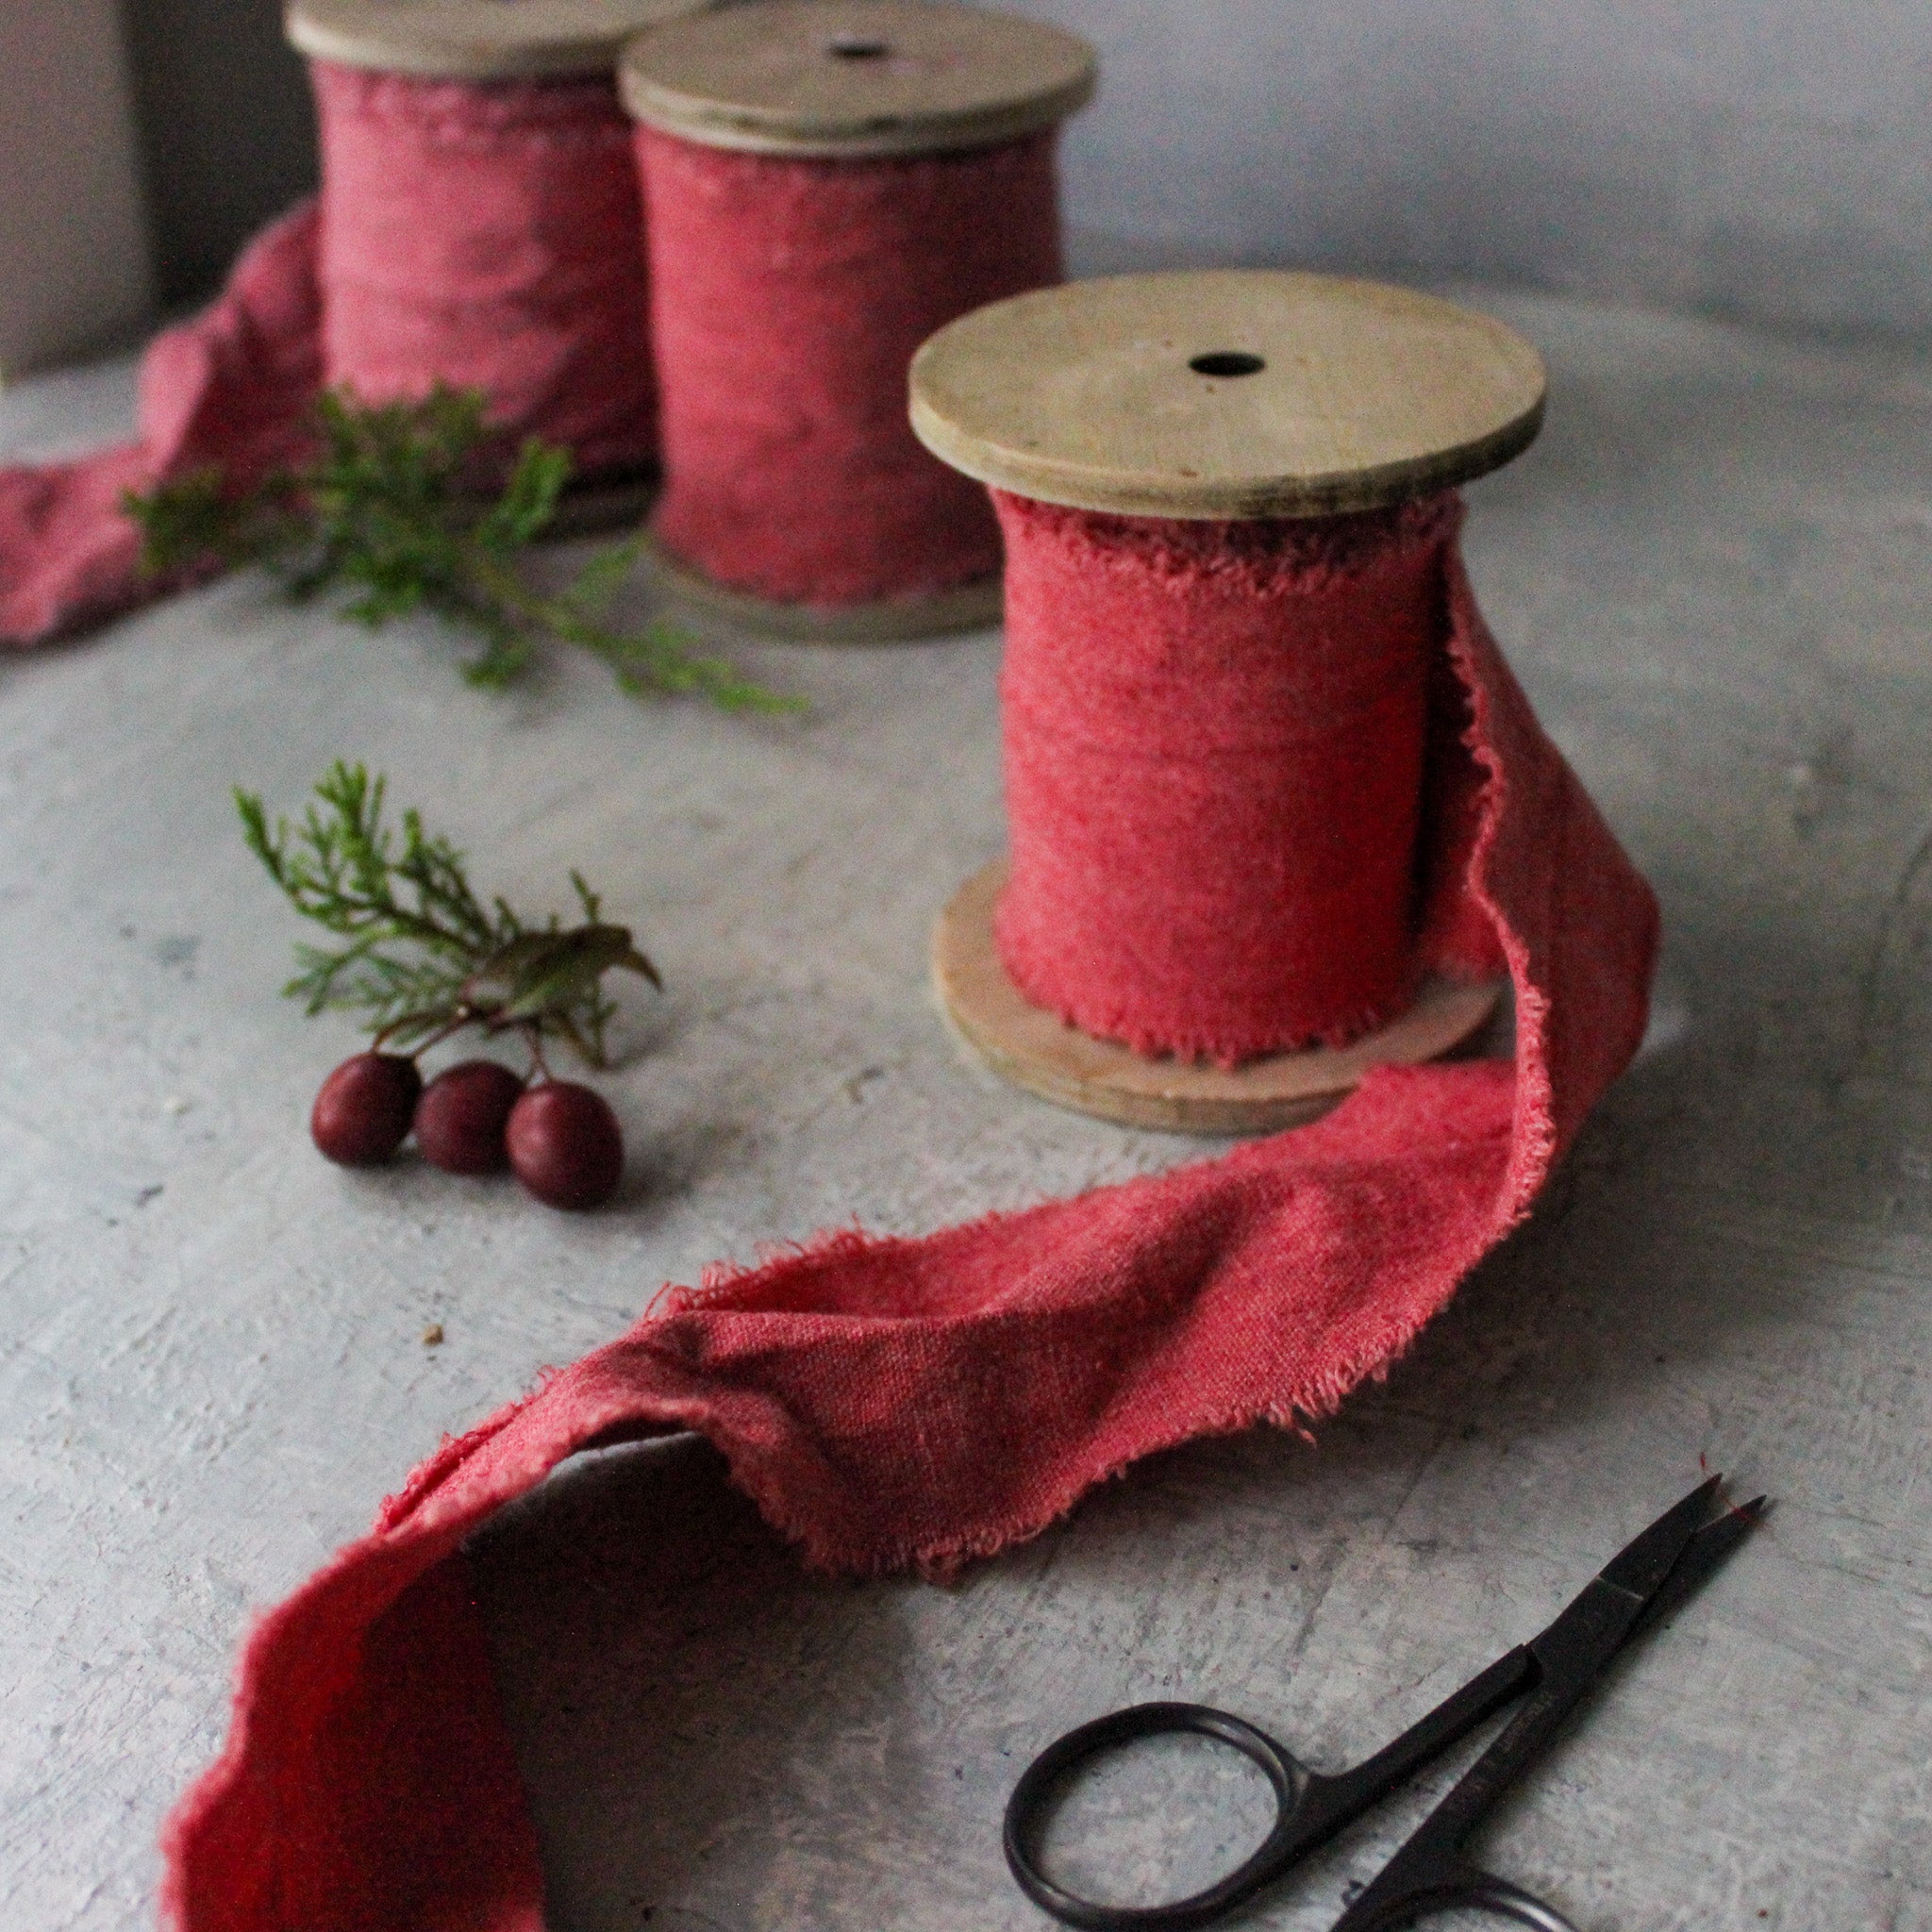 Rustic Red Calico Ribbon - Tribe Castlemaine